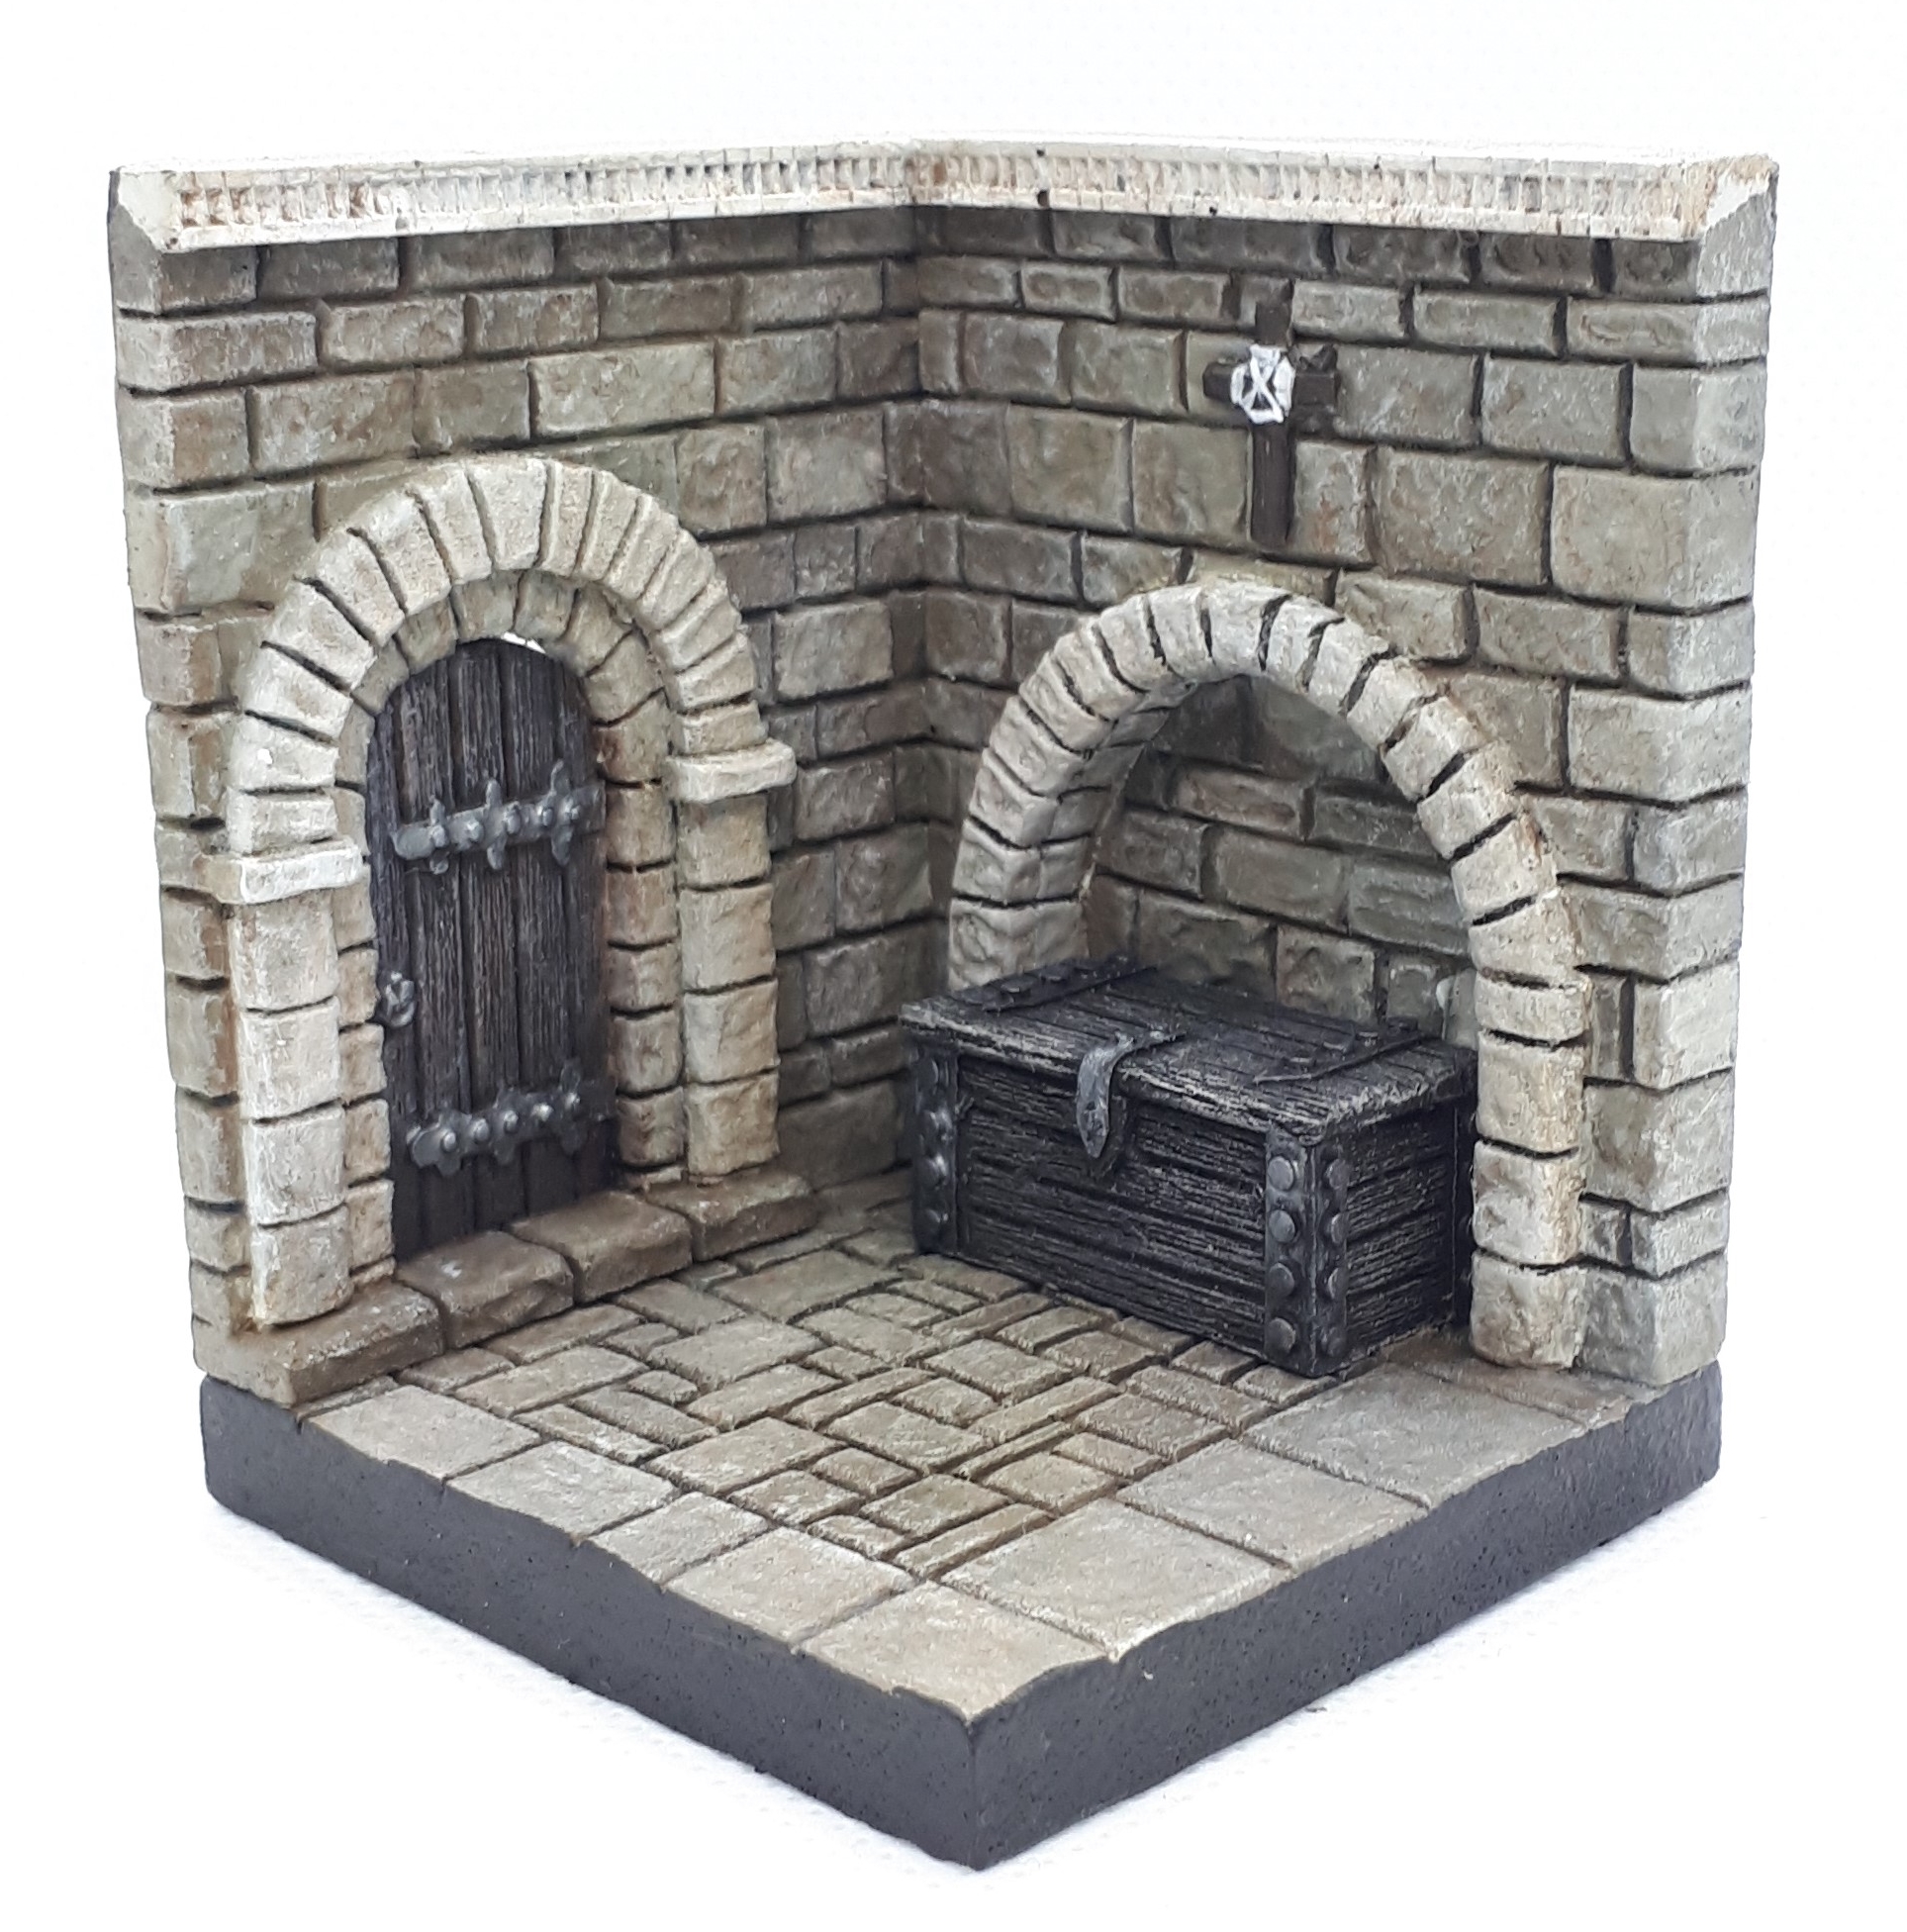 "Chamber of knights" vignette base (5x5cm)